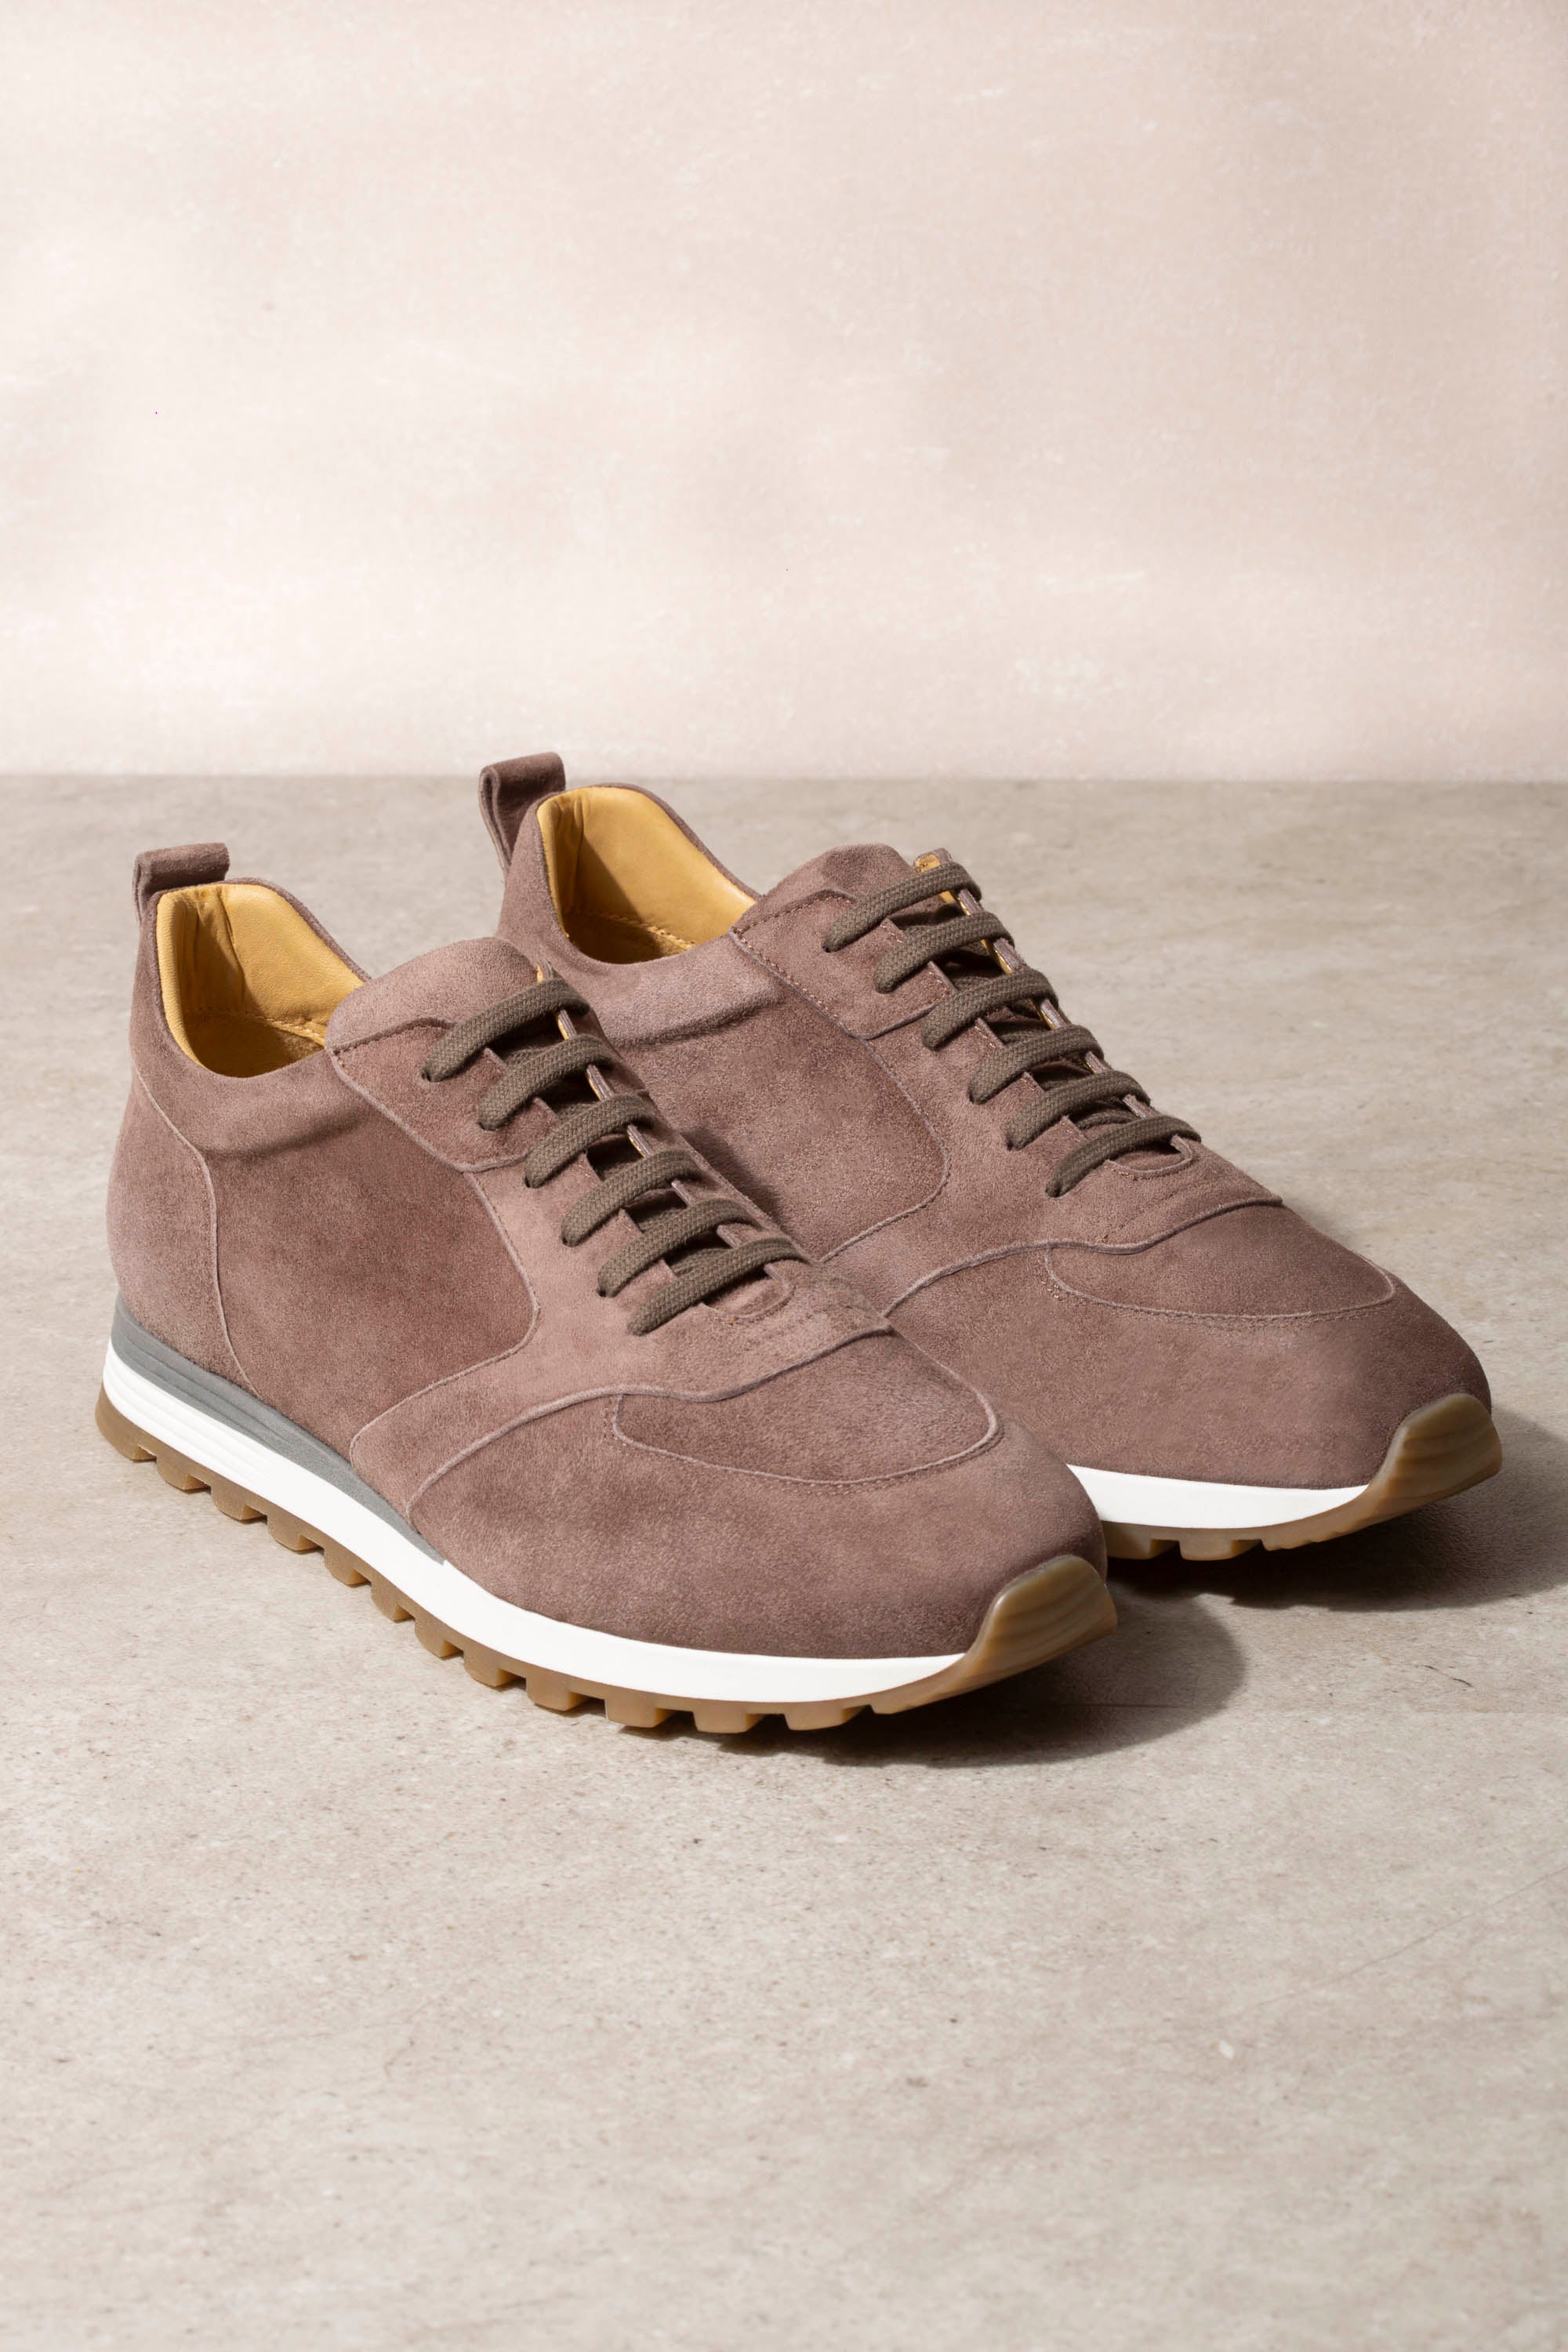 brown runners, taupe runners, runners marrons, sneakers marron, brown sneakers, Italian sneakers, brown Italian sneakers, sneakers Italiennes marron